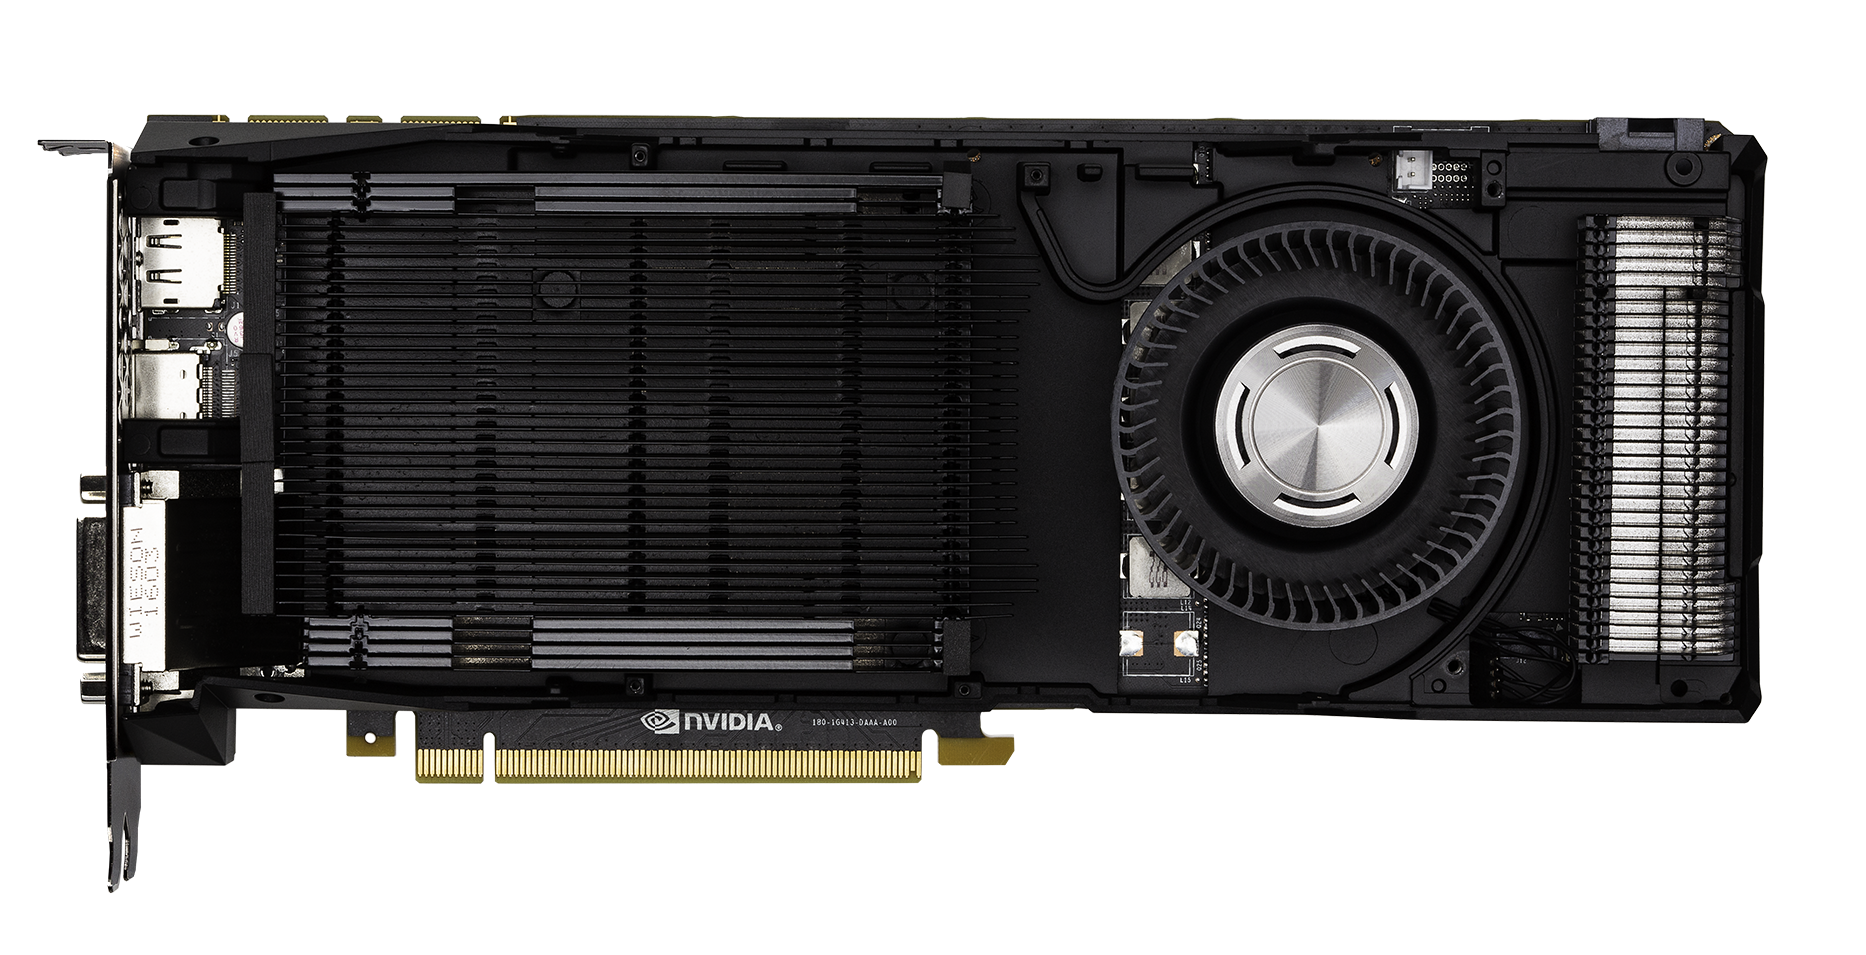 Introducing The GeForce GTX 1080: Gaming Perfected